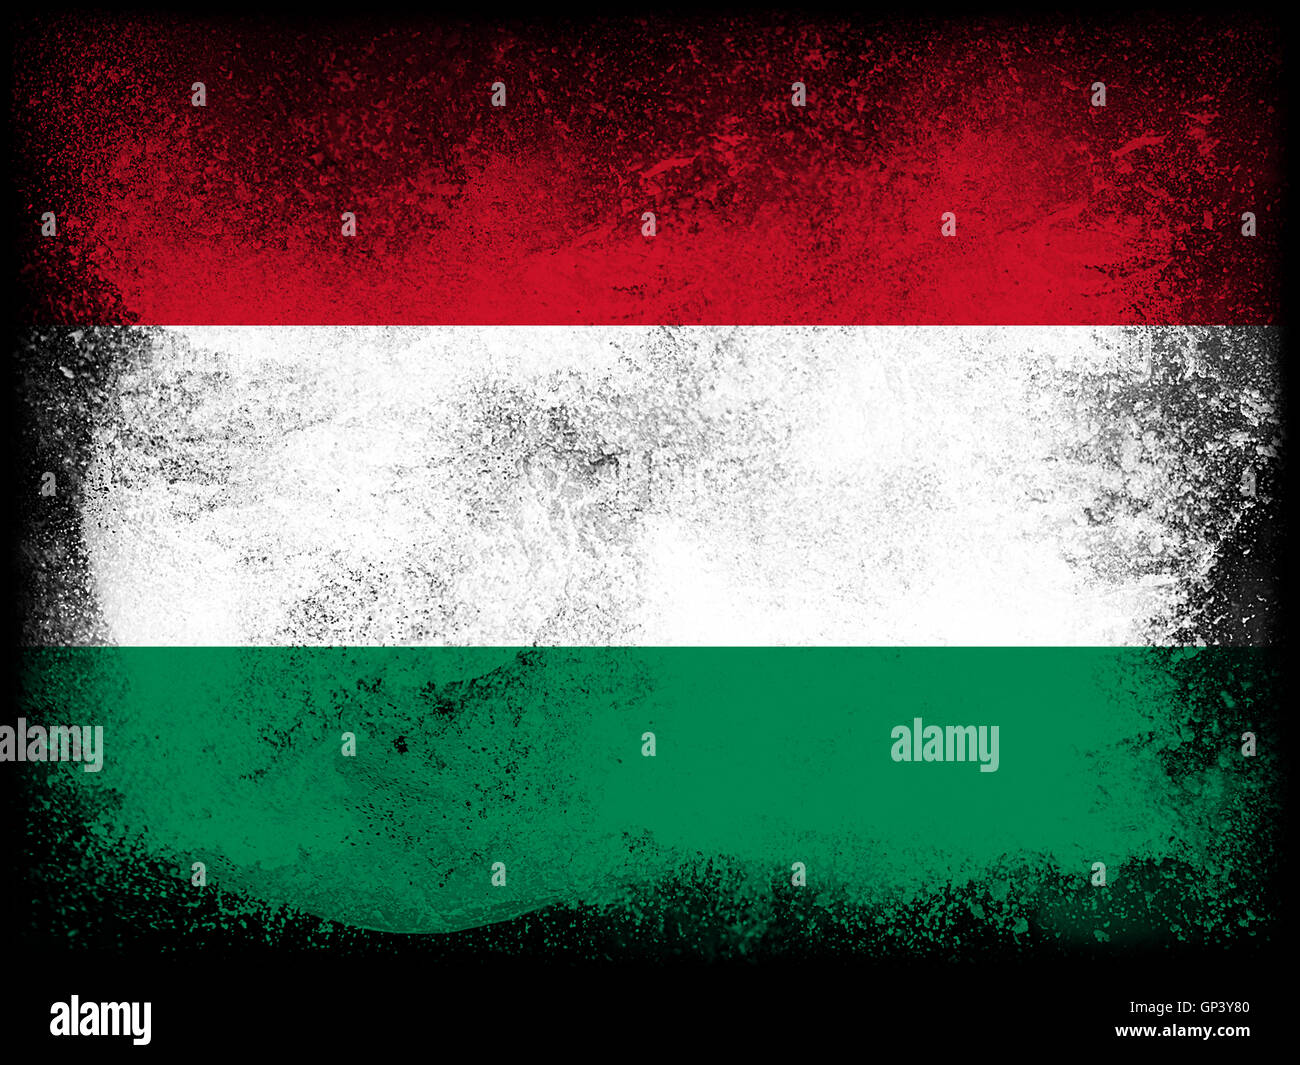 Powder paint exploding in colors of Hungary flag isolated on black background. Abstract particles explosion of colorful dust. Stock Photo